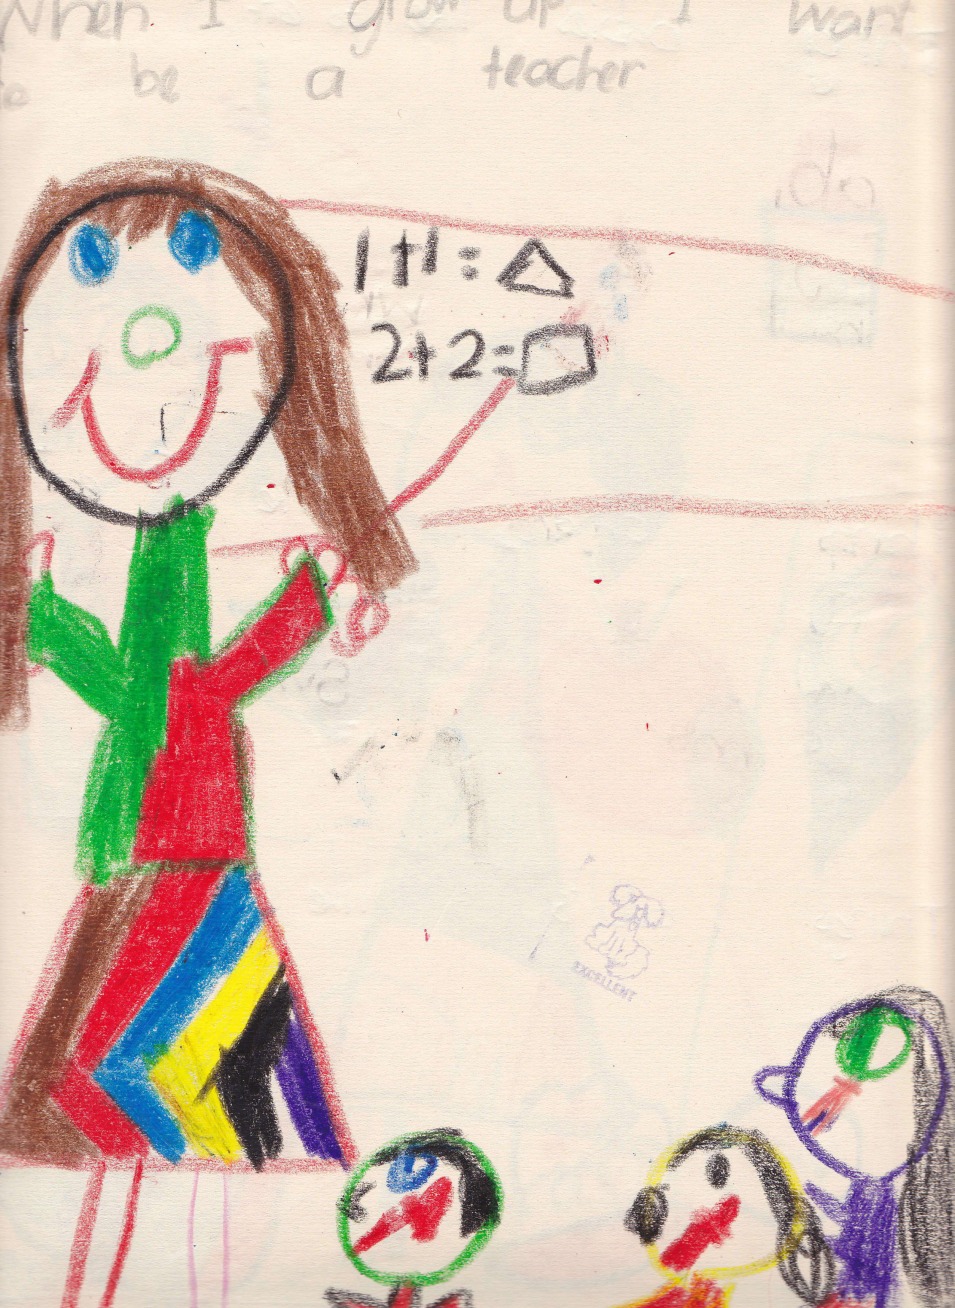 "When I grow up I want to be a teacher" by me, aged 6 (1986)